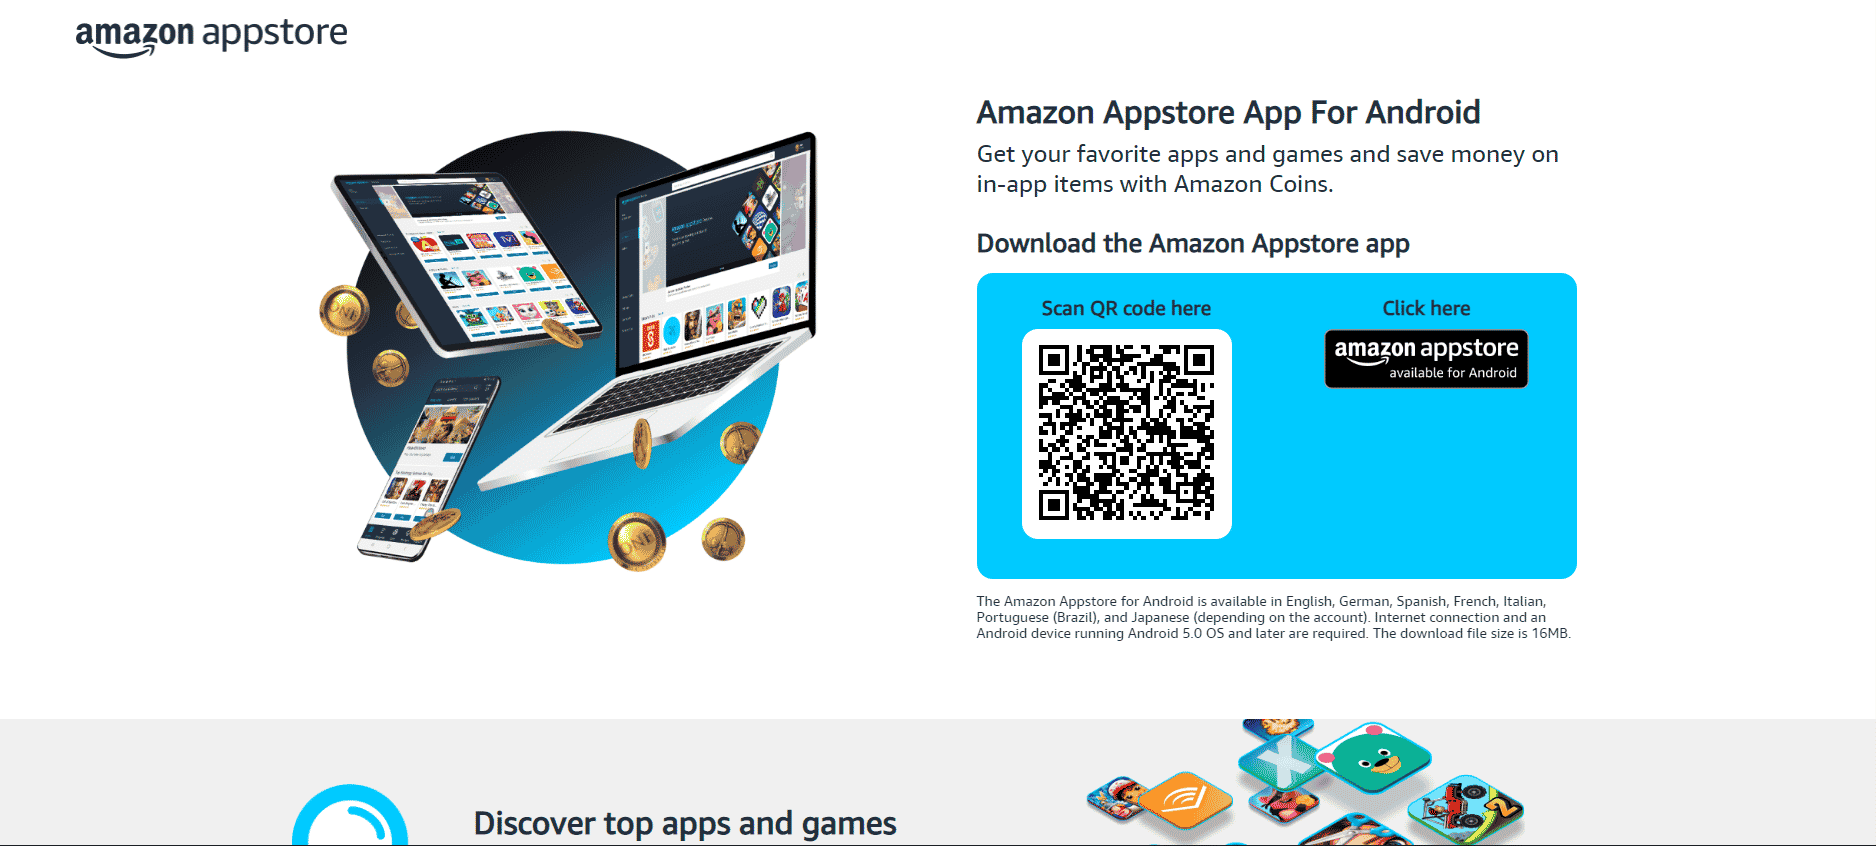 Amazon appstore download page